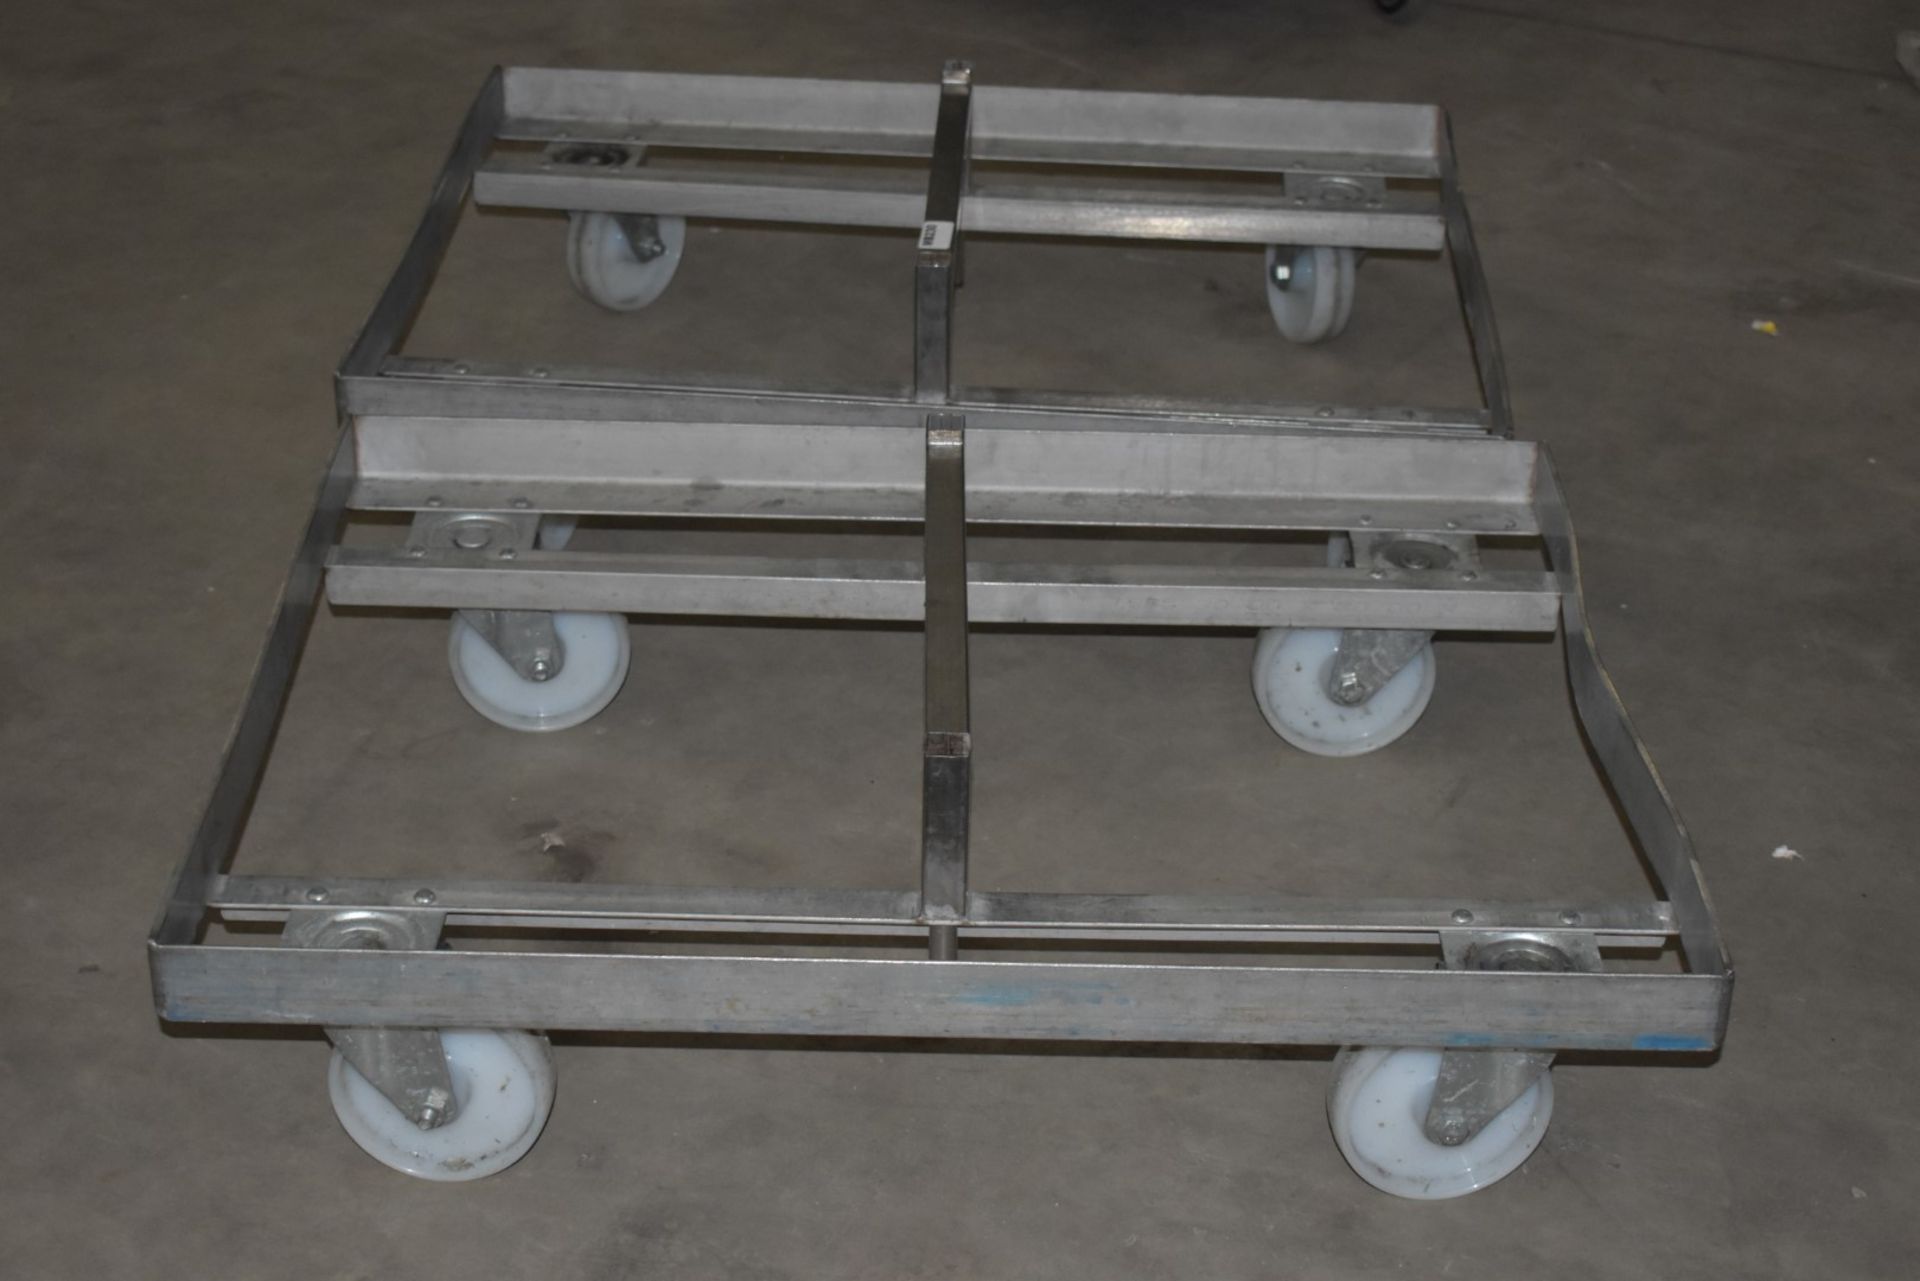 1 x Bakers Bread Tray Trolleys With Heady Duty Castor Wheels - CL453 - Ref MB230 - Location: - Image 3 of 6